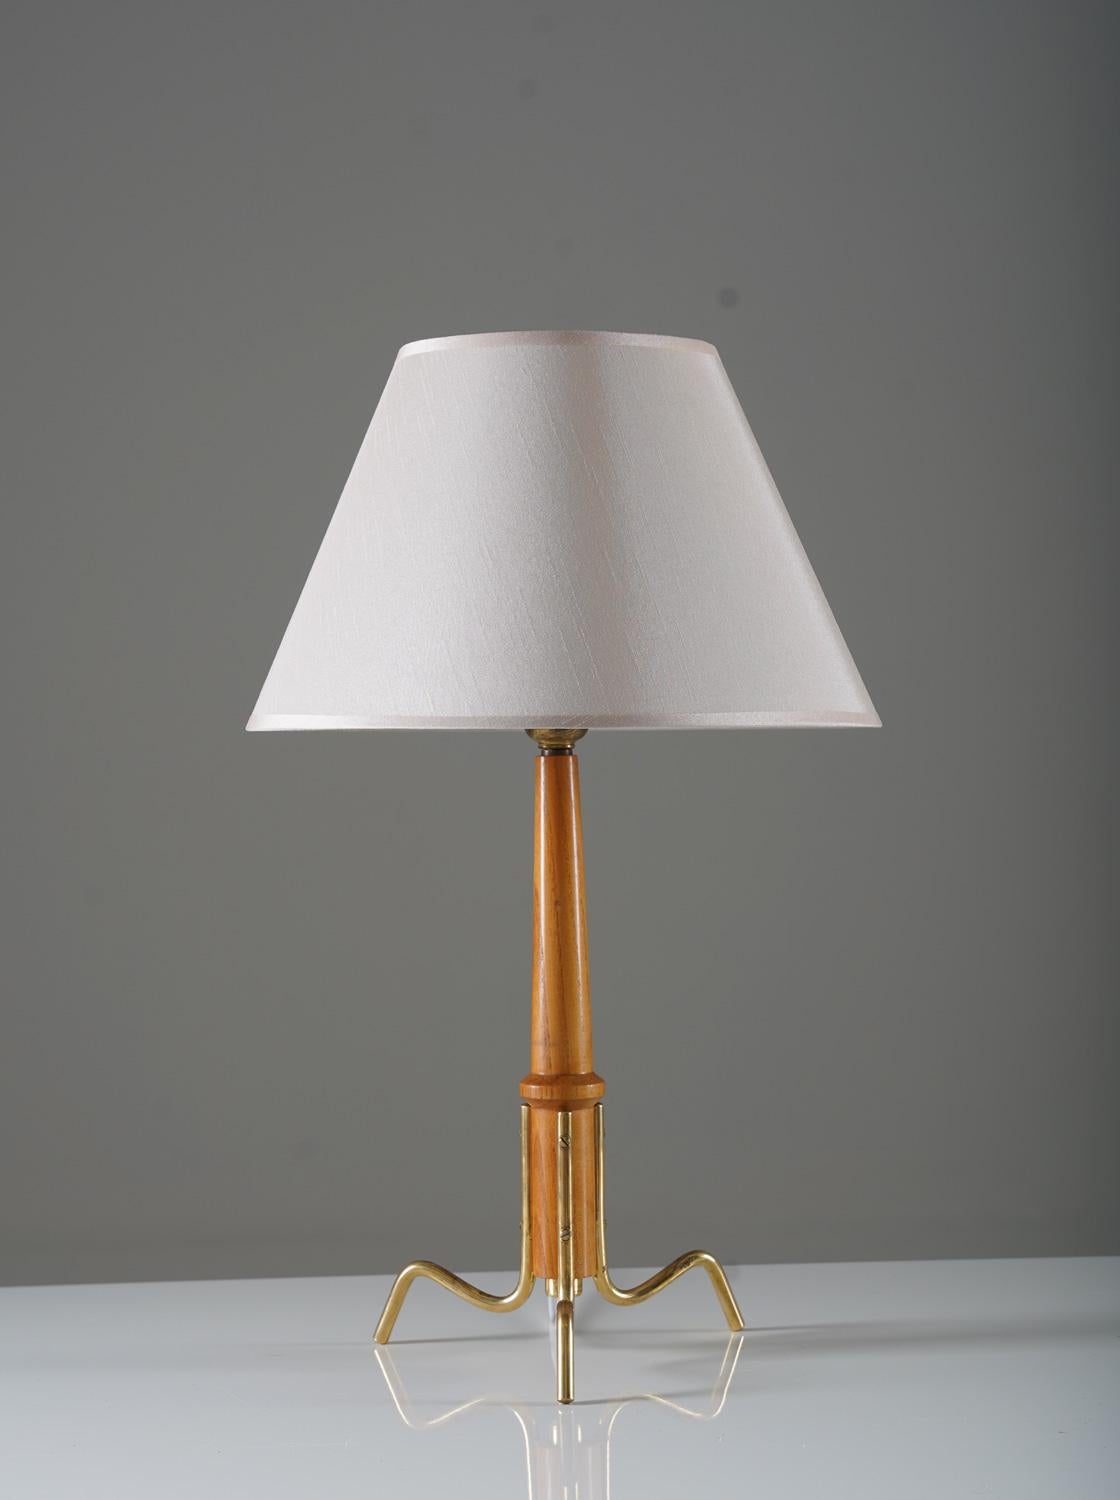 Beautiful table lamp model 15444 by Böhlmarks, Sweden 1946
This lamp is made of elm with a tripod base in brass. The lamp comes with a vintage beige-white shade.


Condition: good original condition with light signs of age and use. The shade is not